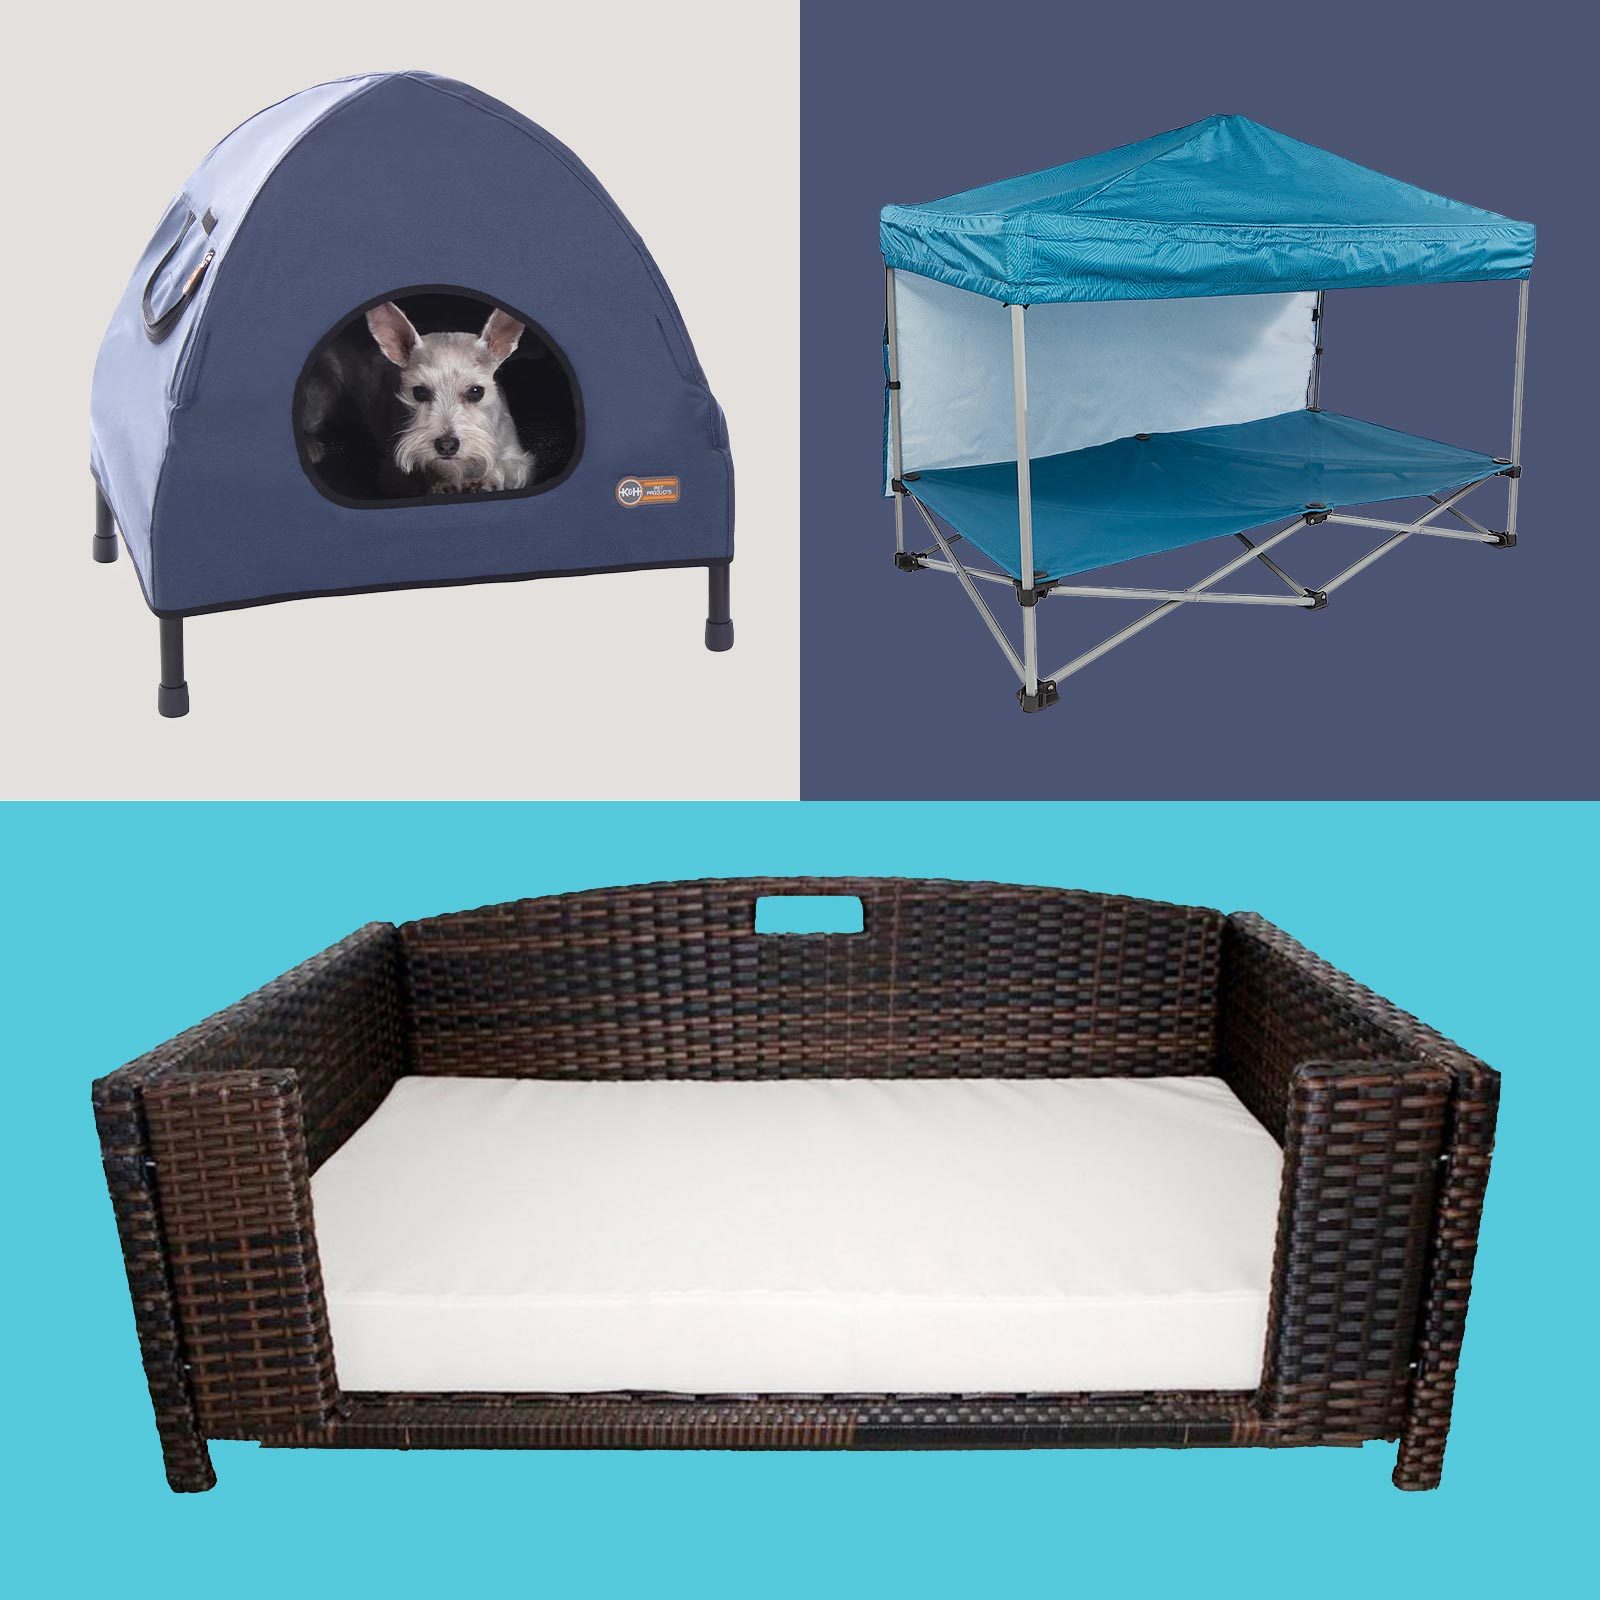 https://www.rd.com/wp-content/uploads/2023/06/RD-ecomm-7-Best-Elevated-Dog-Beds-To-Keep-Your-Pup-Cool-While-Lounging-Outside-via-merchant-3.jpg